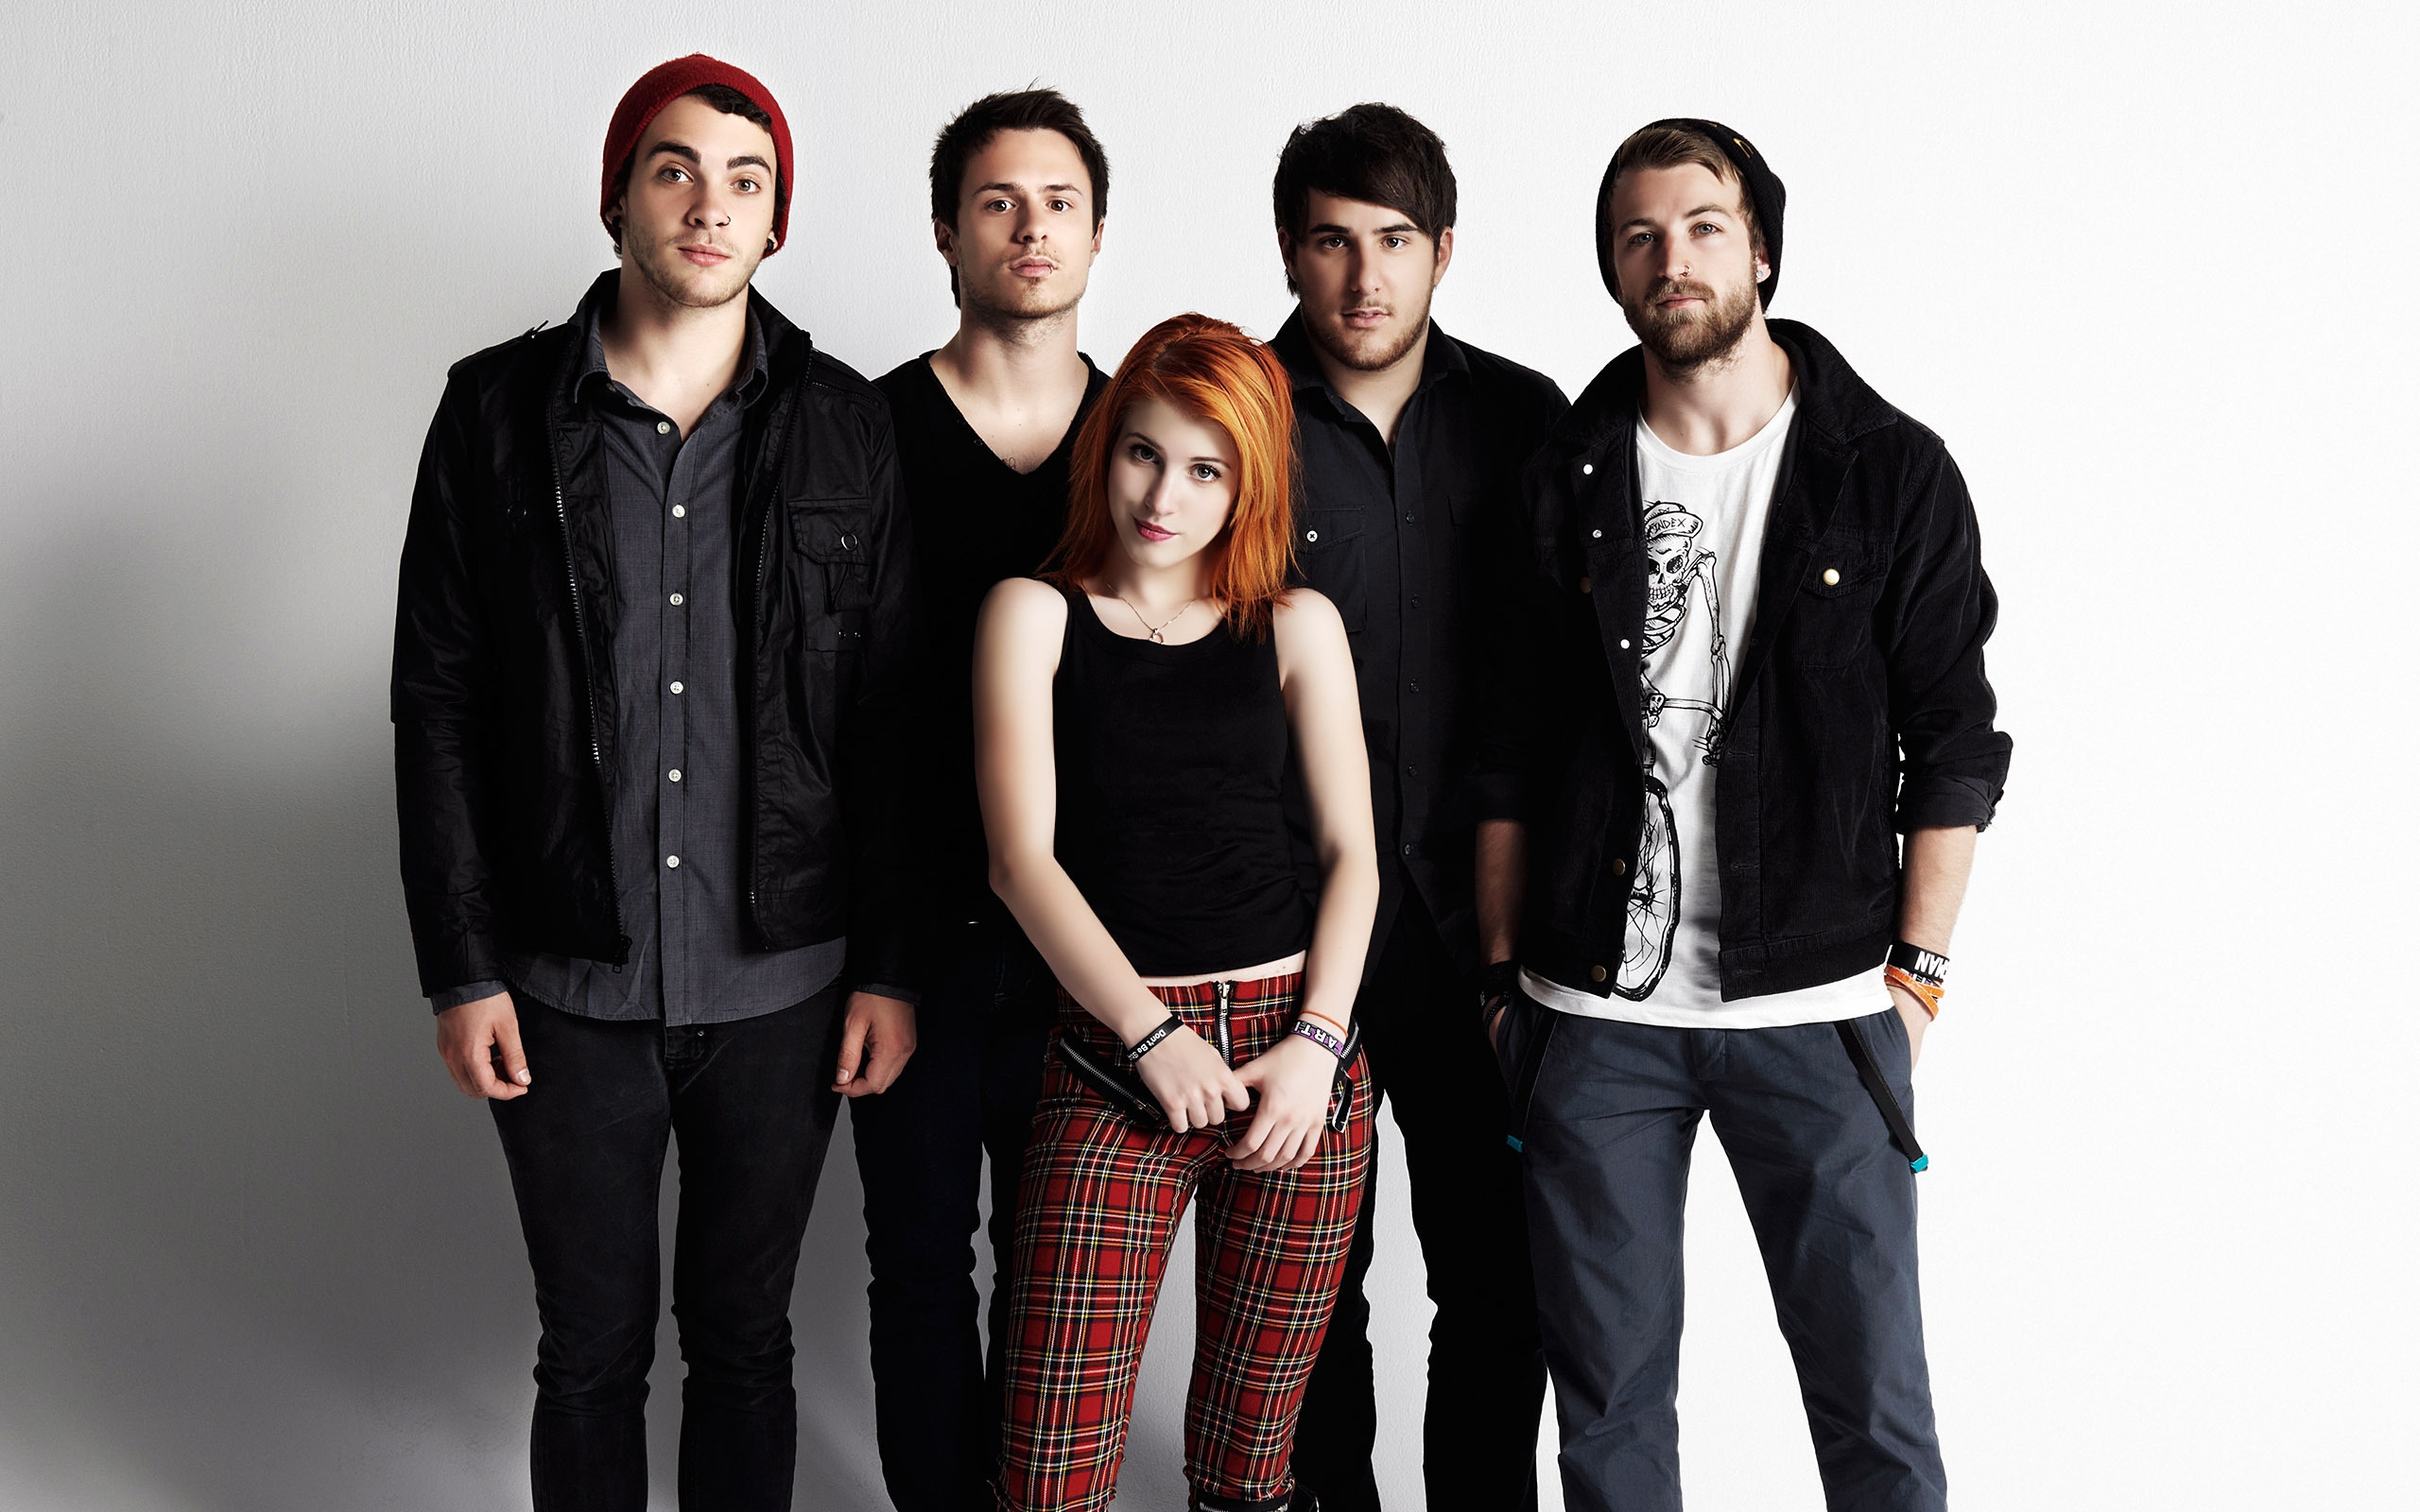 Hayley Williams and Paramore for 2560 x 1600 widescreen resolution